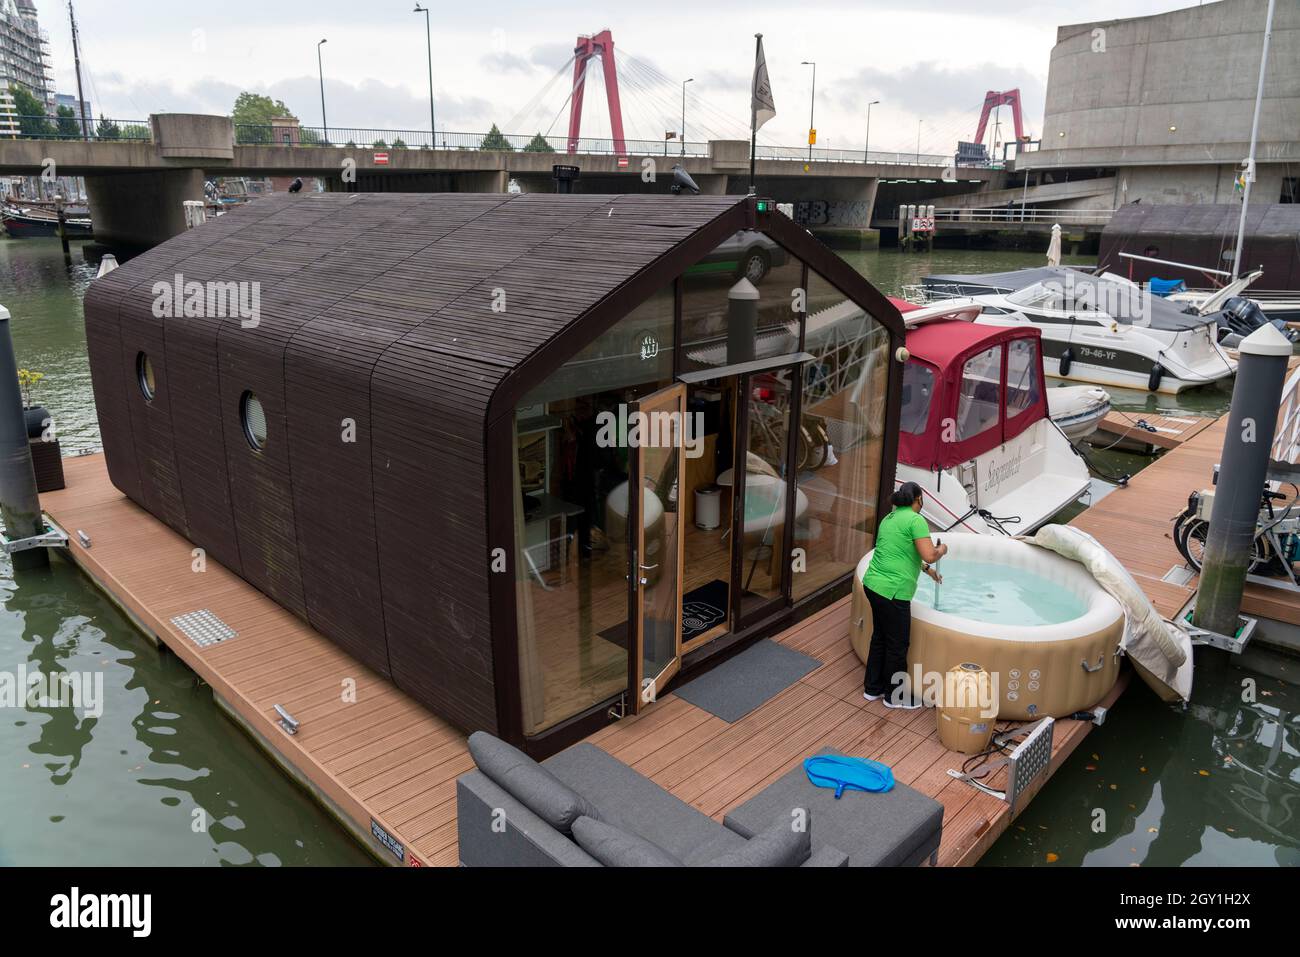 The Wikkelboat, a houseboat made of 24 layers, glued, cardboard from Scandinavian trees, Tiny House, for rent, in the Wijnhaven, Rotterdam, Netherland Stock Photo